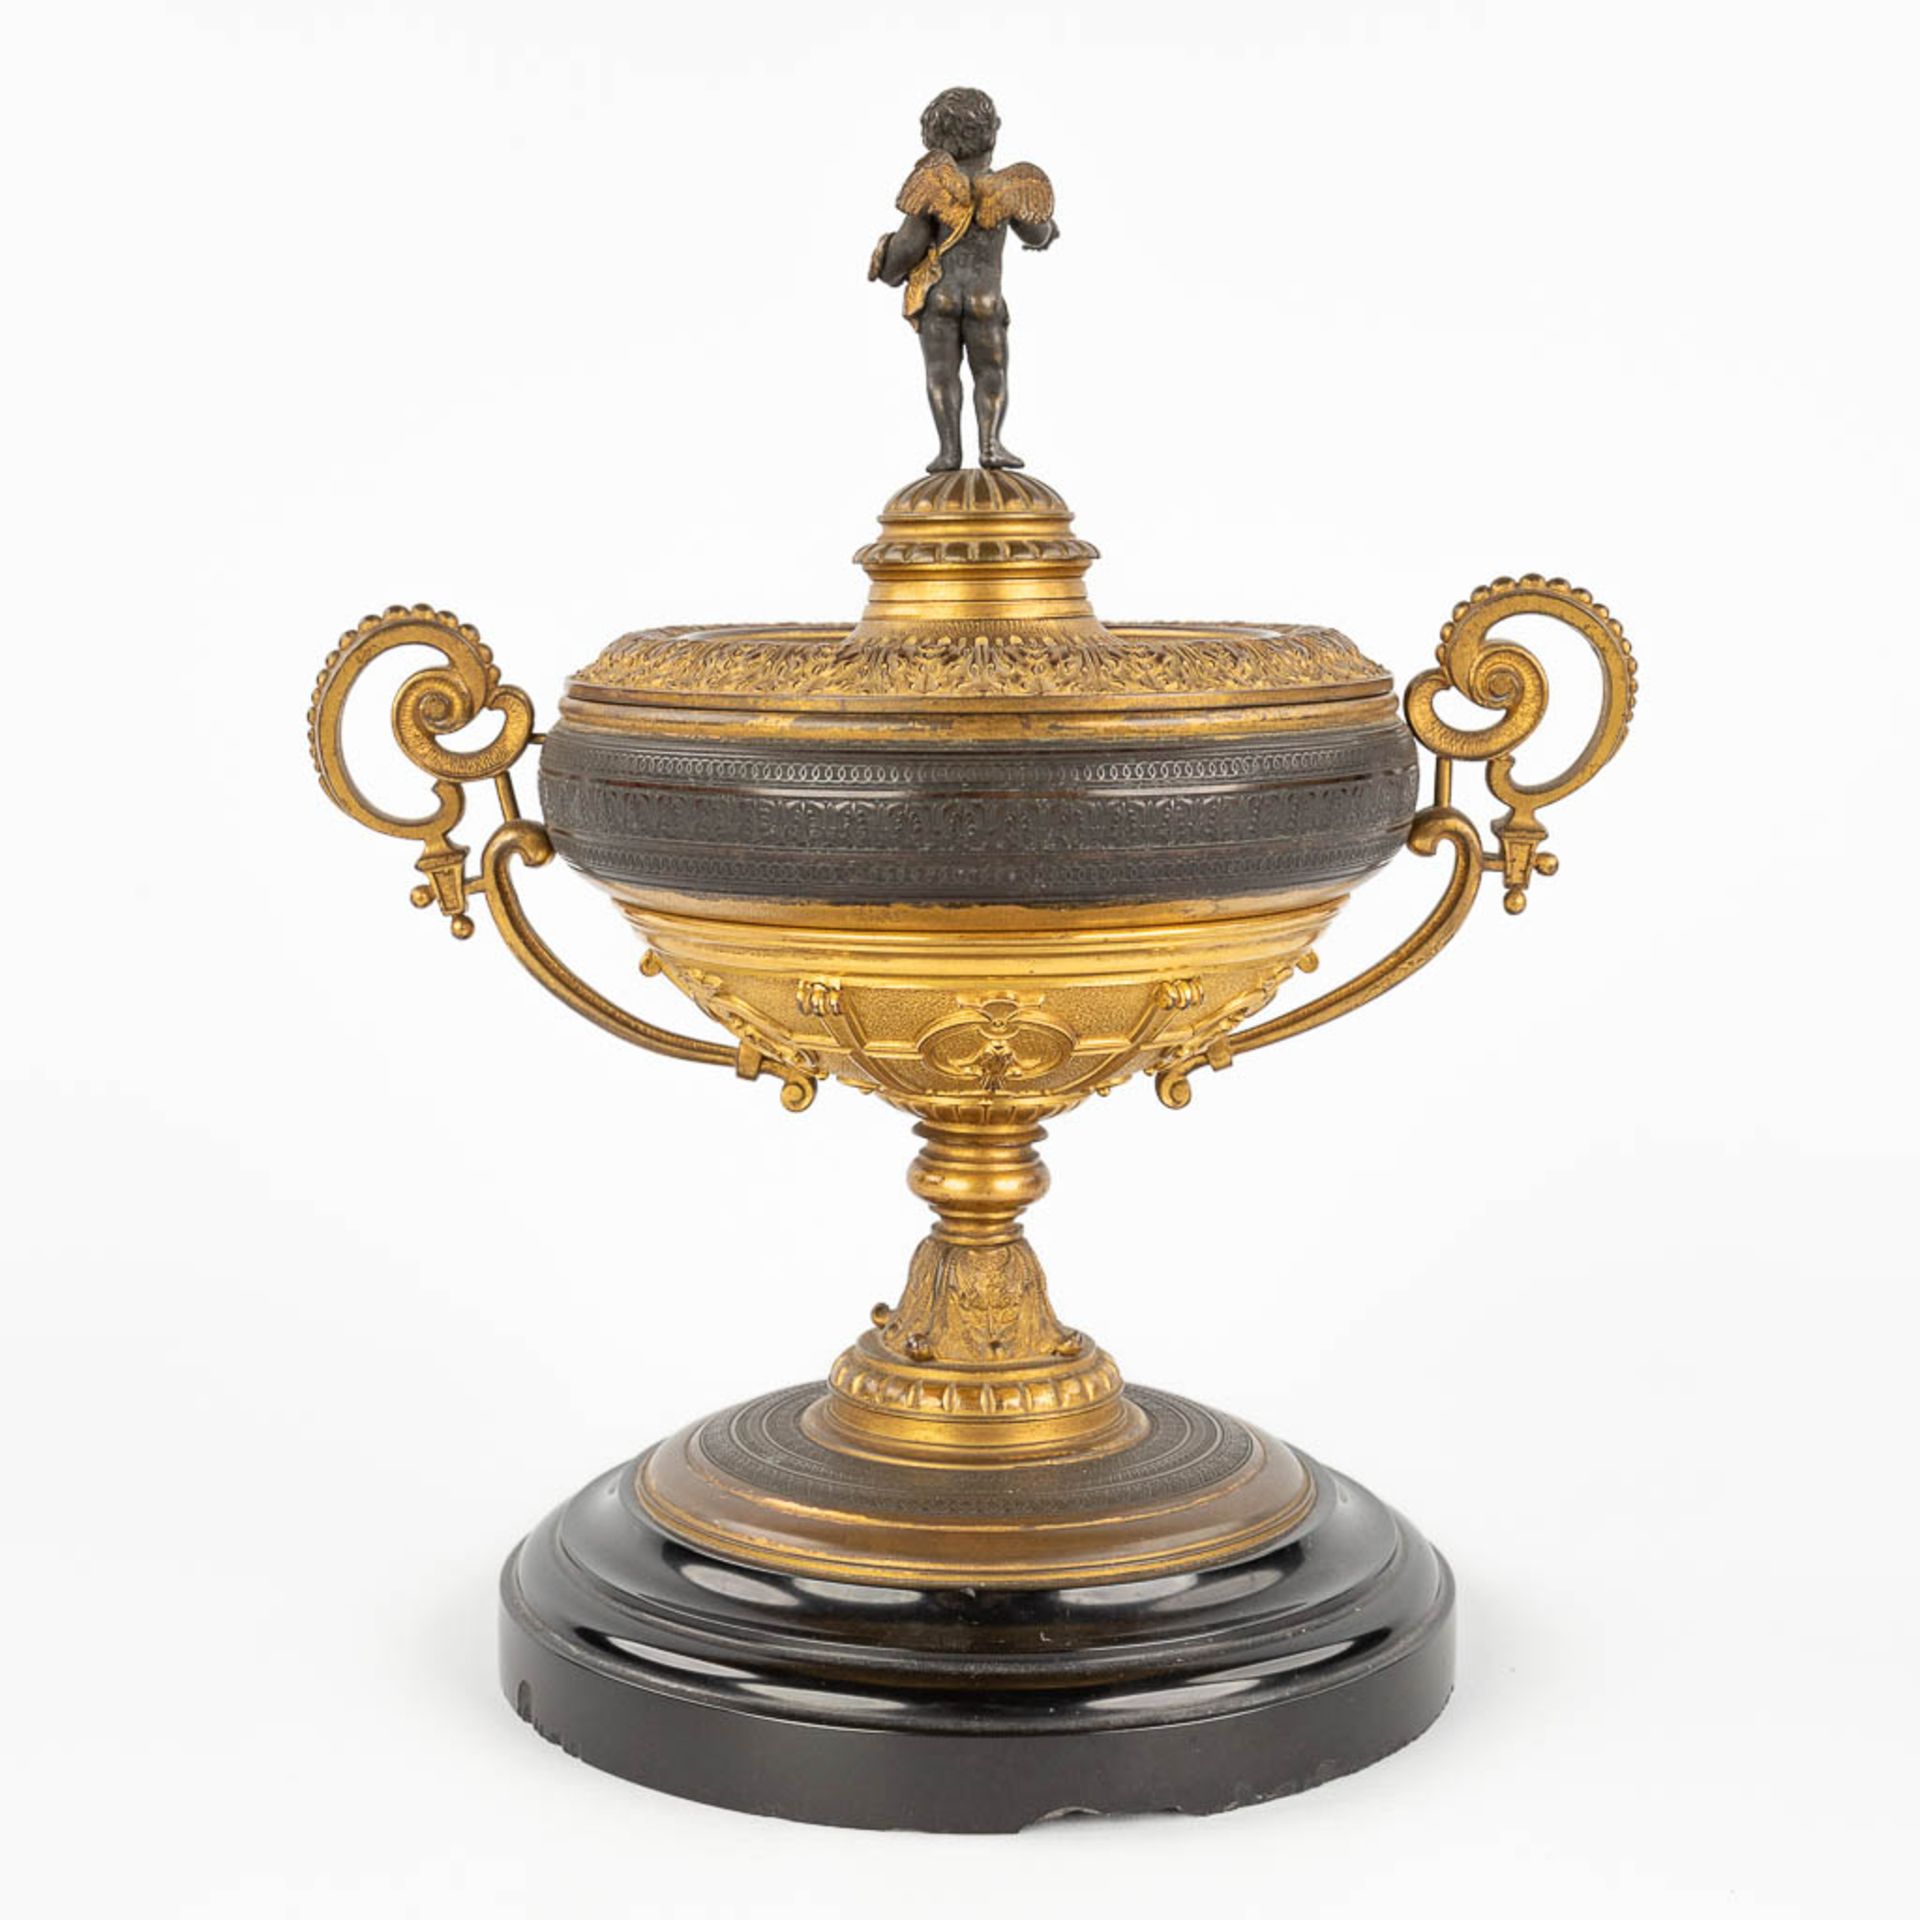 An antique trophy, made of gilt and patinated bronze. 19th C. (L: 16 x W: 22 x H: 27 cm) - Image 5 of 14